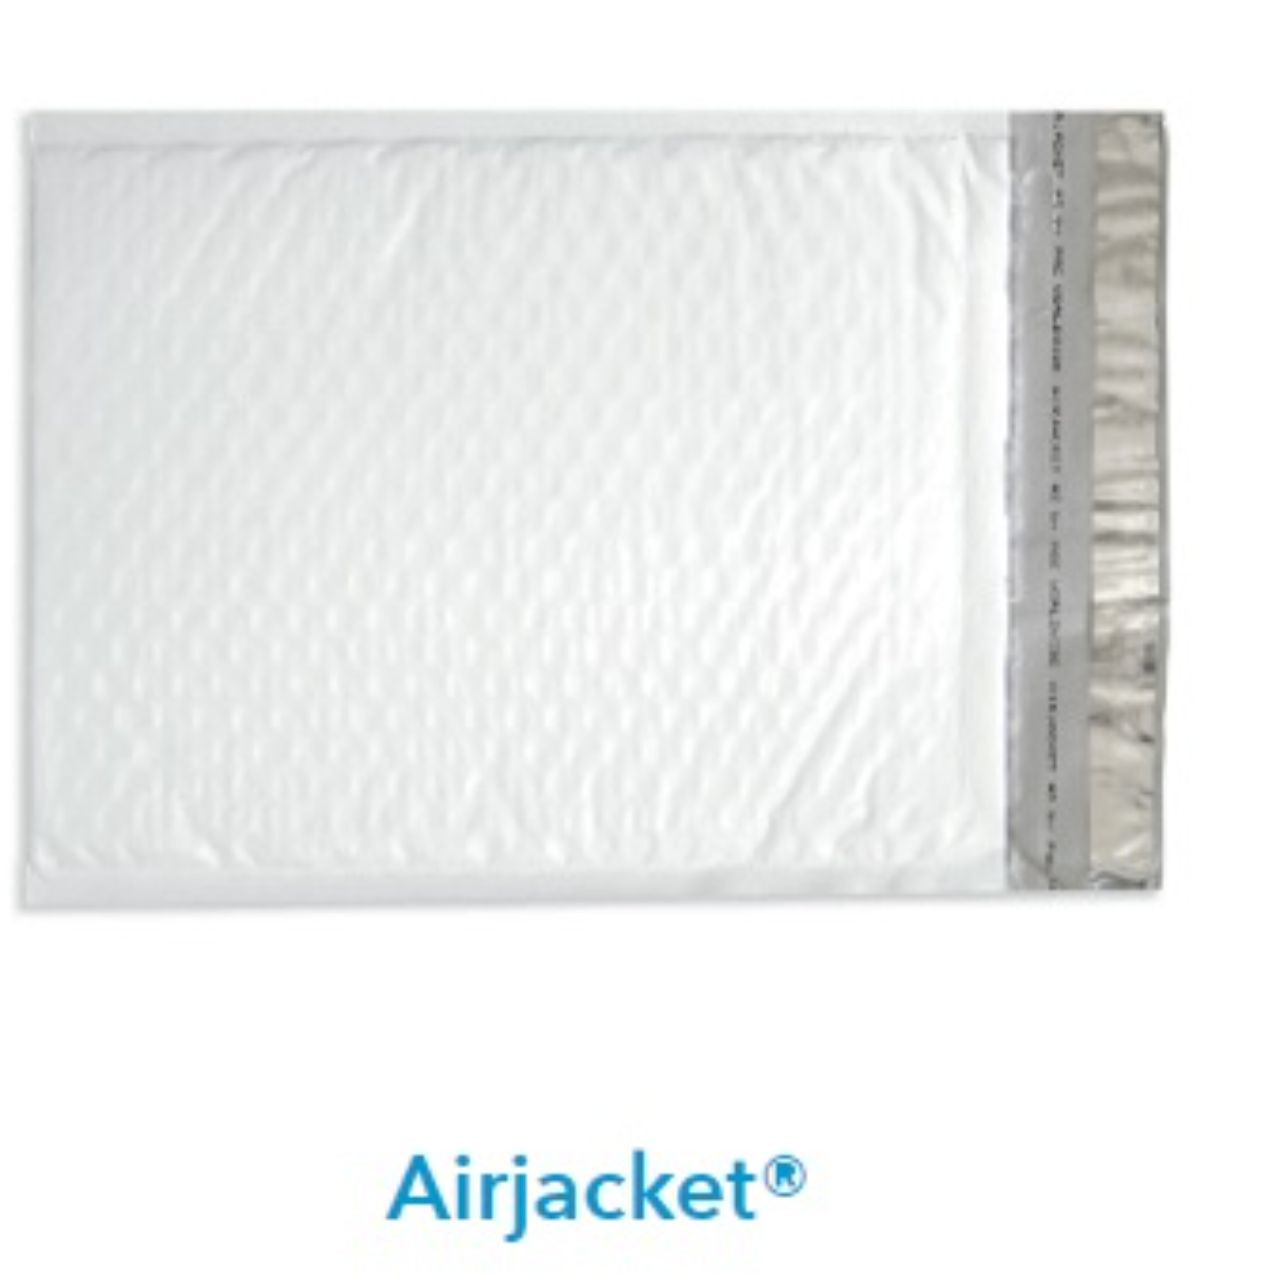 Air Jacket #3 padded poly mailer 8.5" x 13.75" (inside diameter) with 100/case